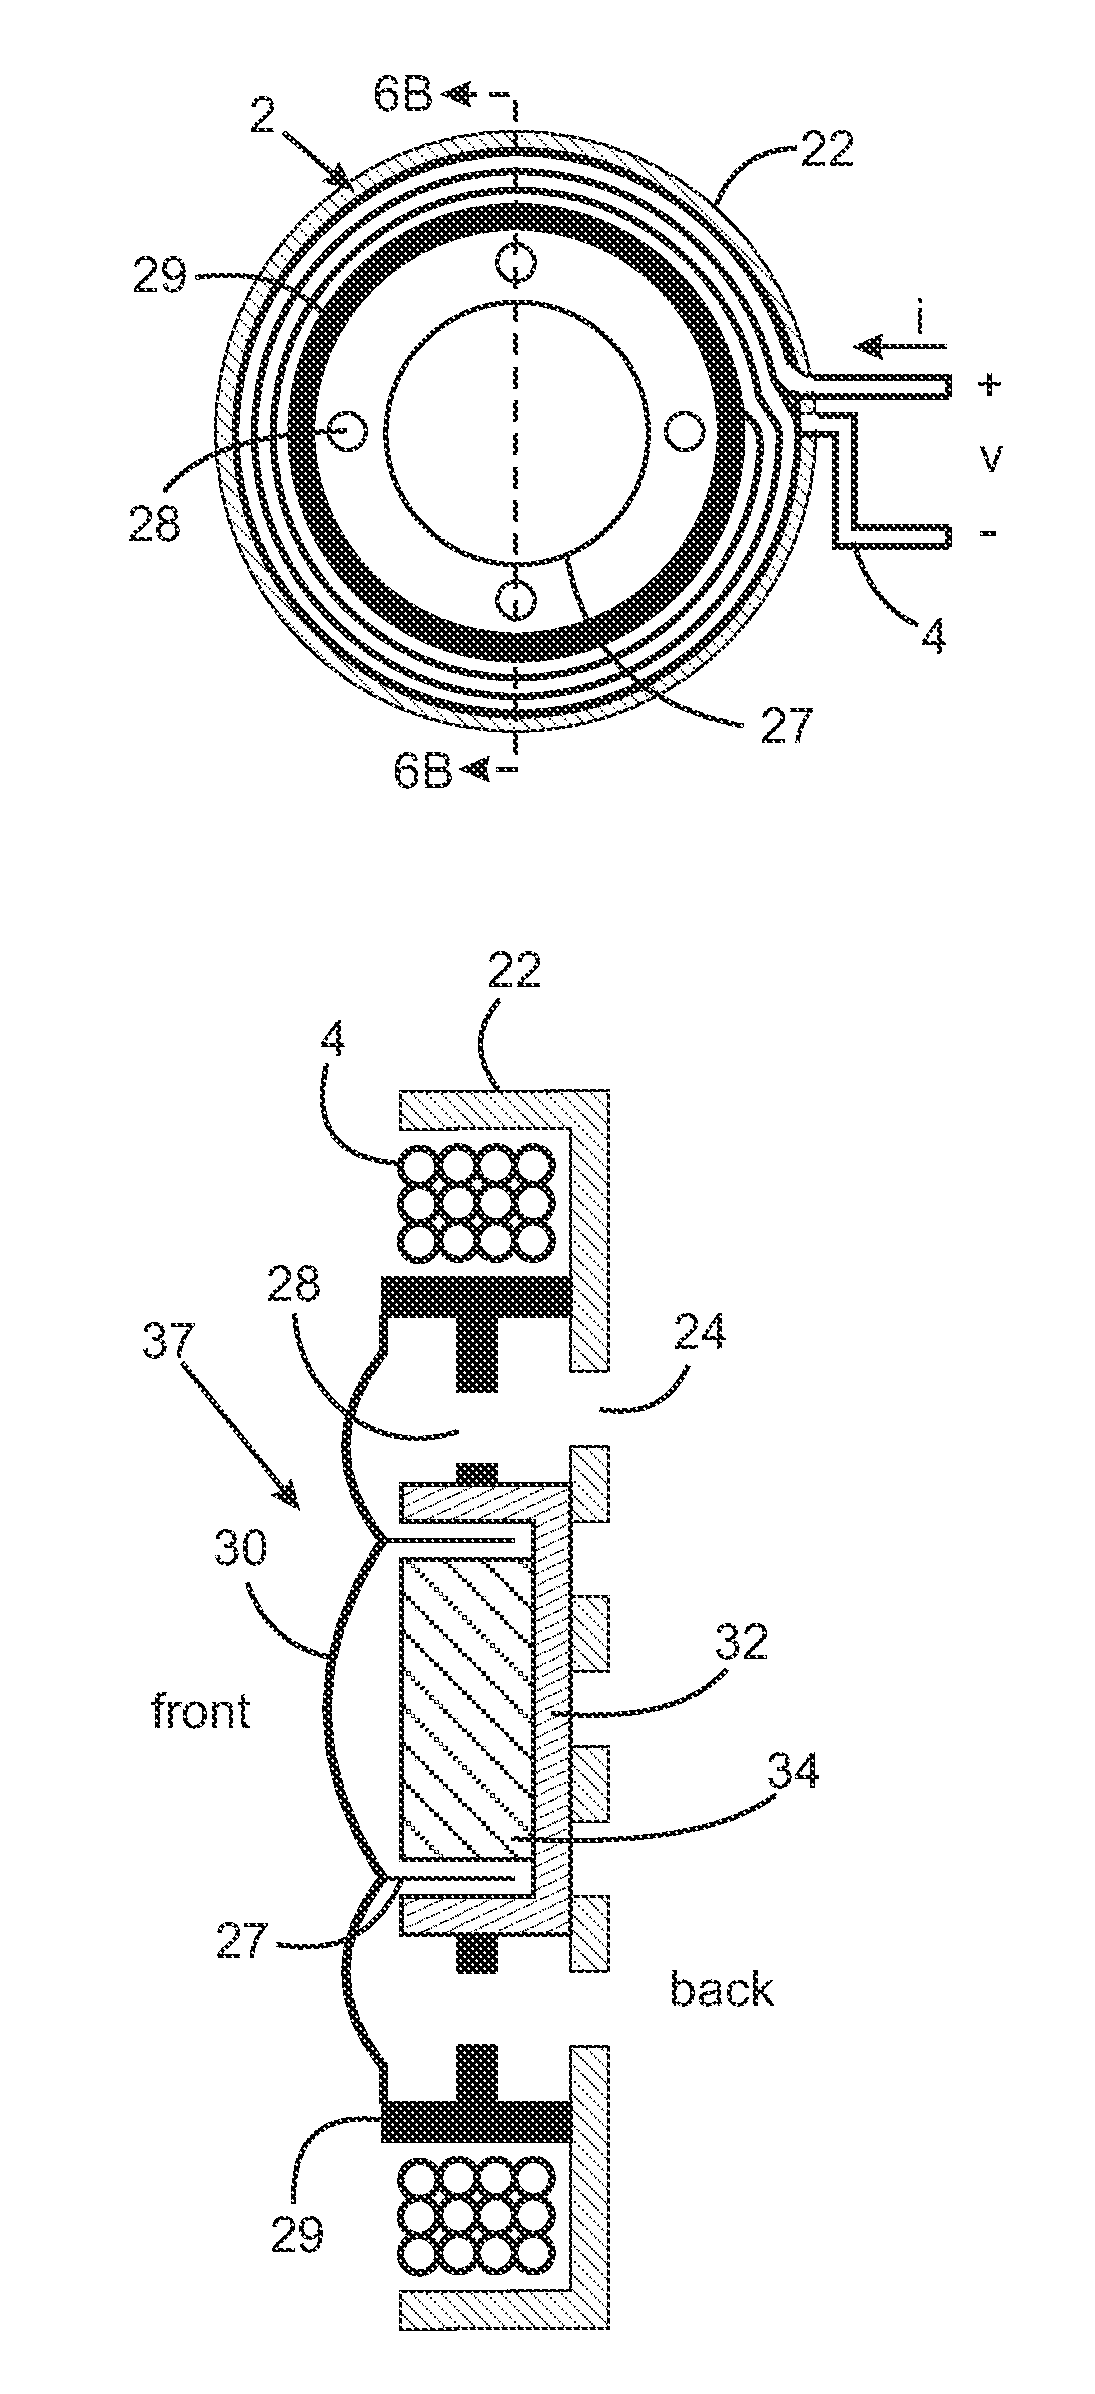 Transmitter with Improved Sensitivity and Shielding